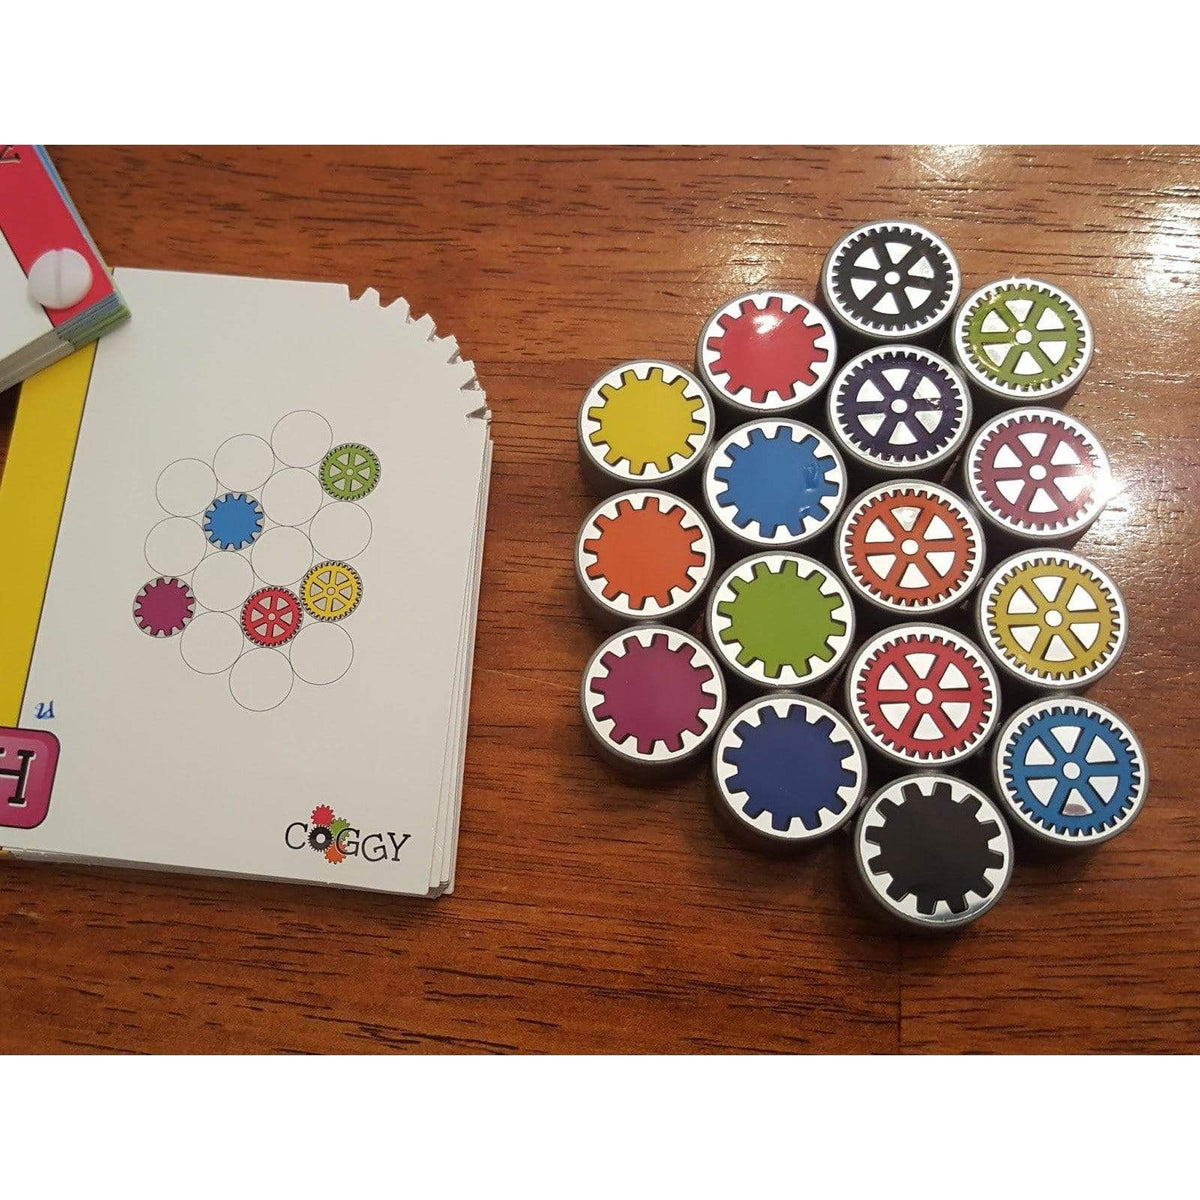 Coggy Fat Brain Toys Co Puzzles/Playthings